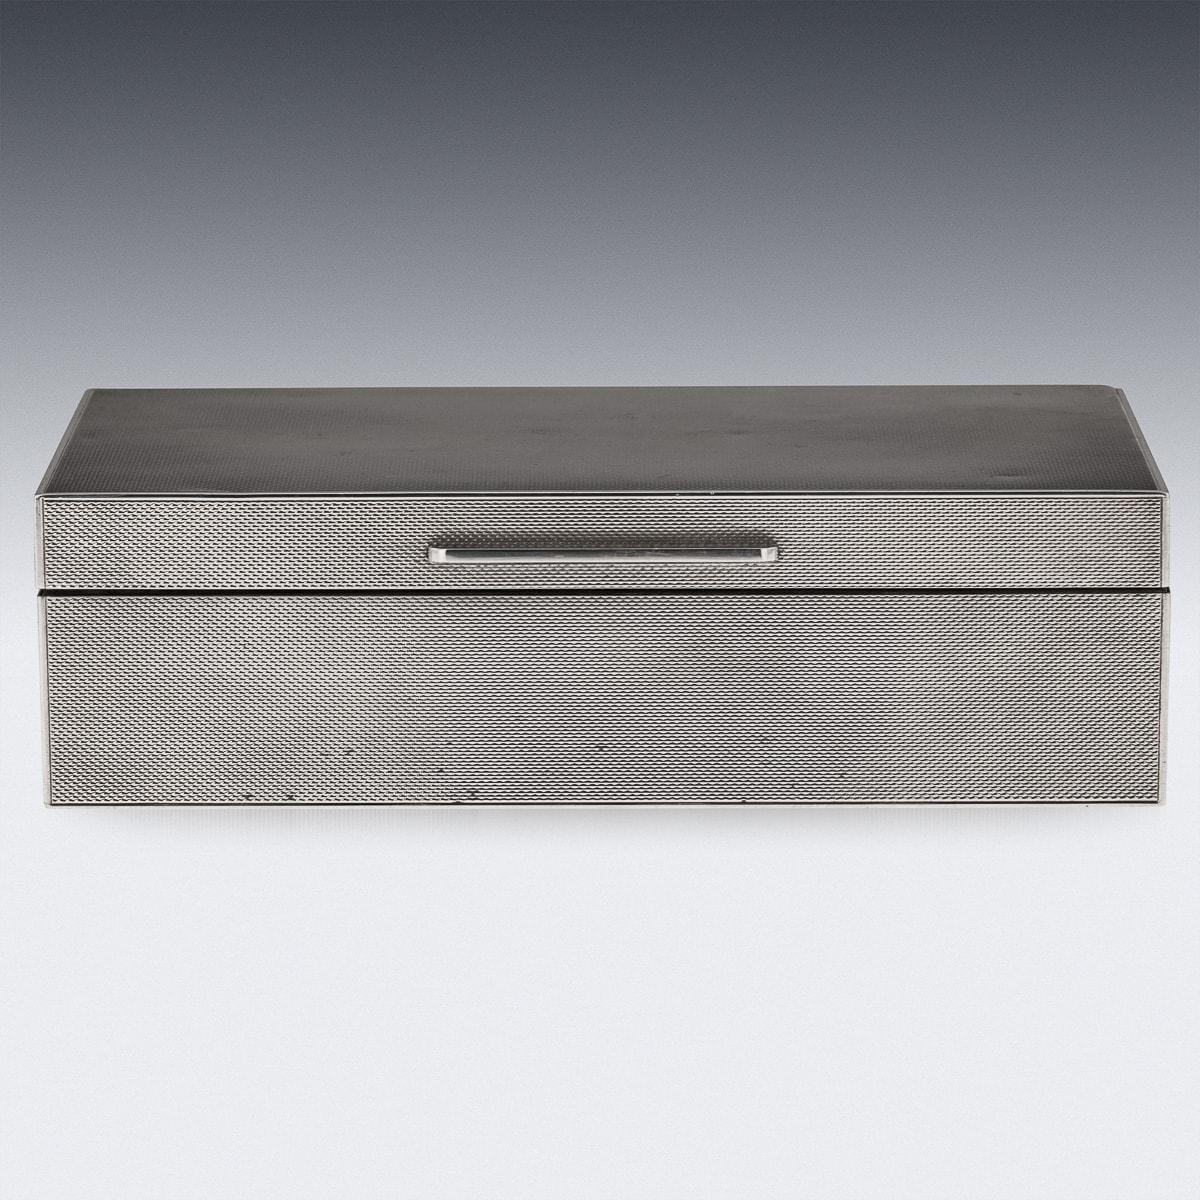 Antique mid 20th Century simple and elegant box with a multitude of uses, currently perfect for storing cigarettes or cigars but equally adept at storing jewellery or trinkets. The solid silver body is unsually finshed in all-over engine turning - a